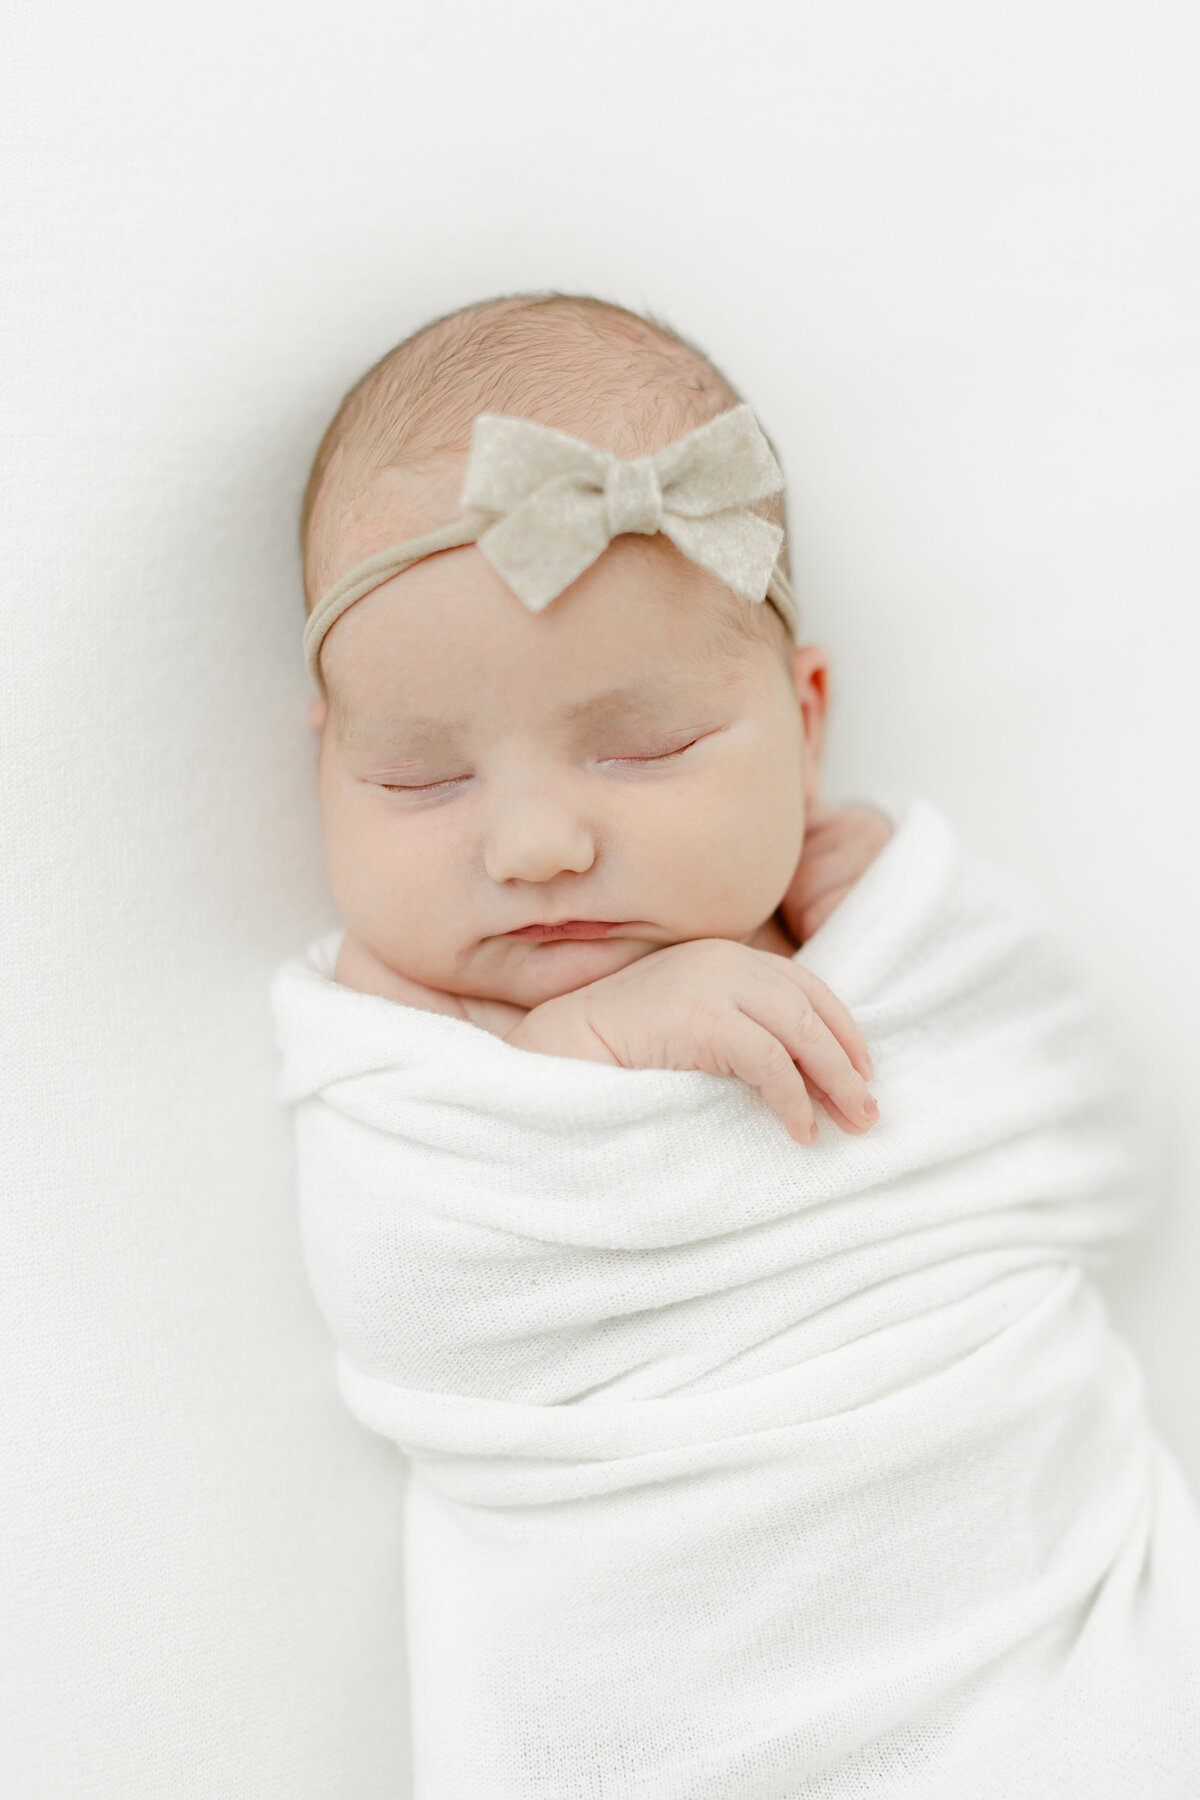 sweet baby girl swaddled and sleeping peacefully in a white swaddle blanket wearing a bow as she is photographed by Philadelphia Newborn Photographer Tara Federico